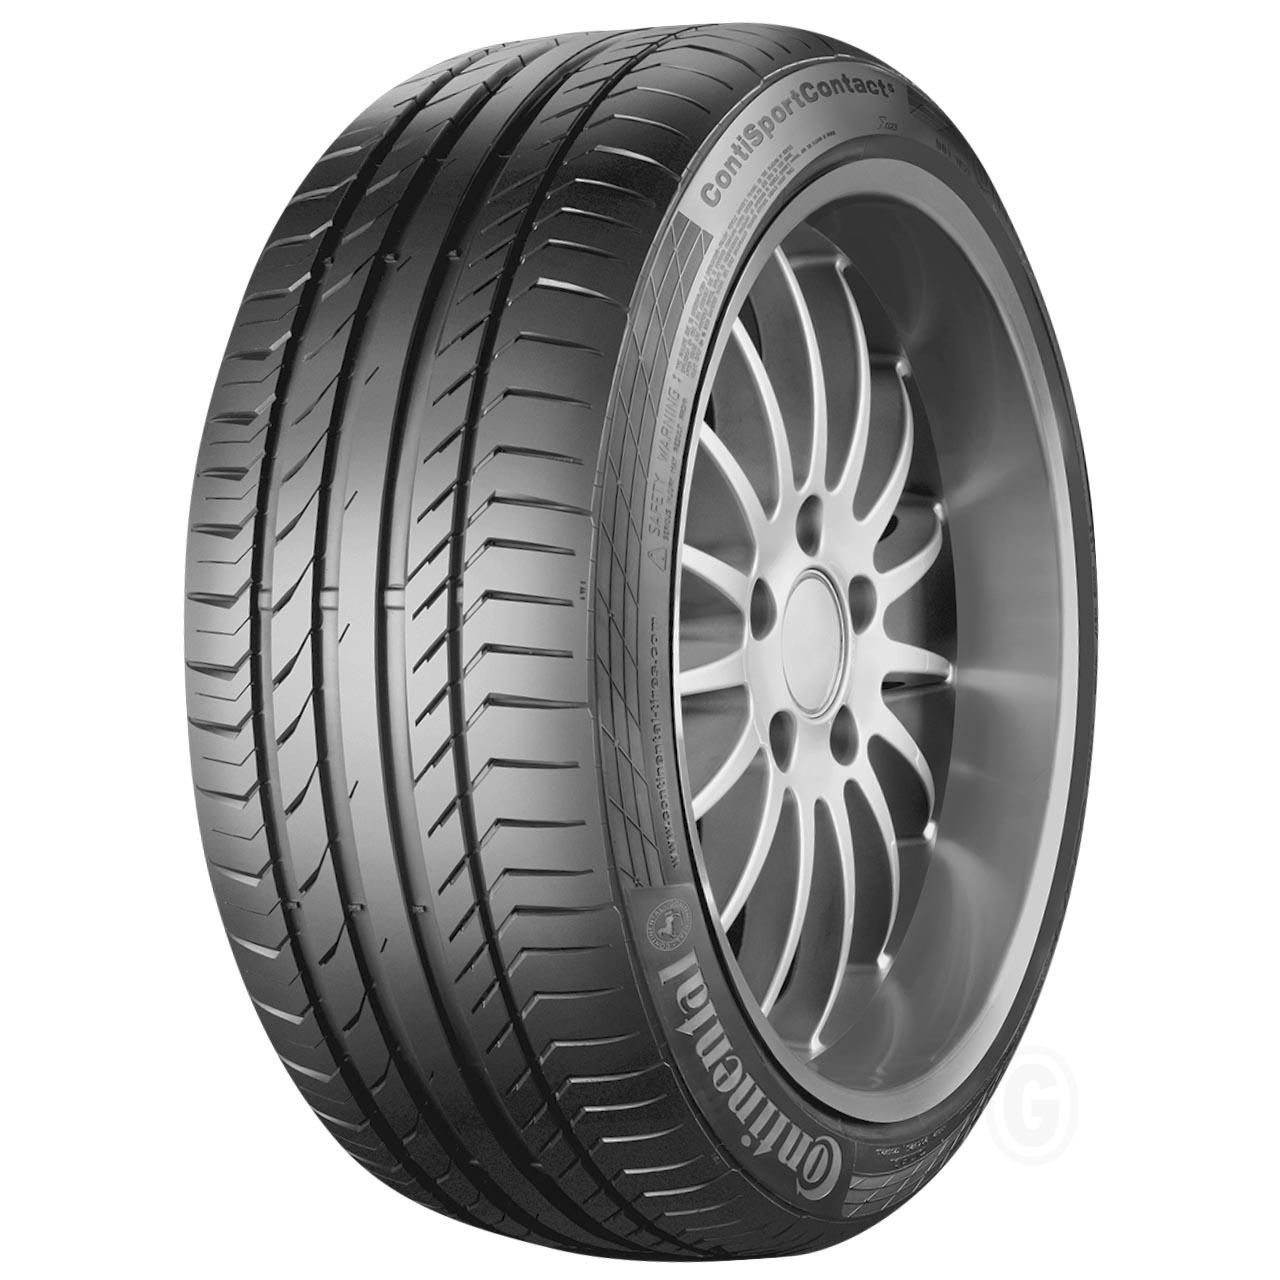 Continental CONTISPORTCONTACT 5 255/45R18 103H XL FR